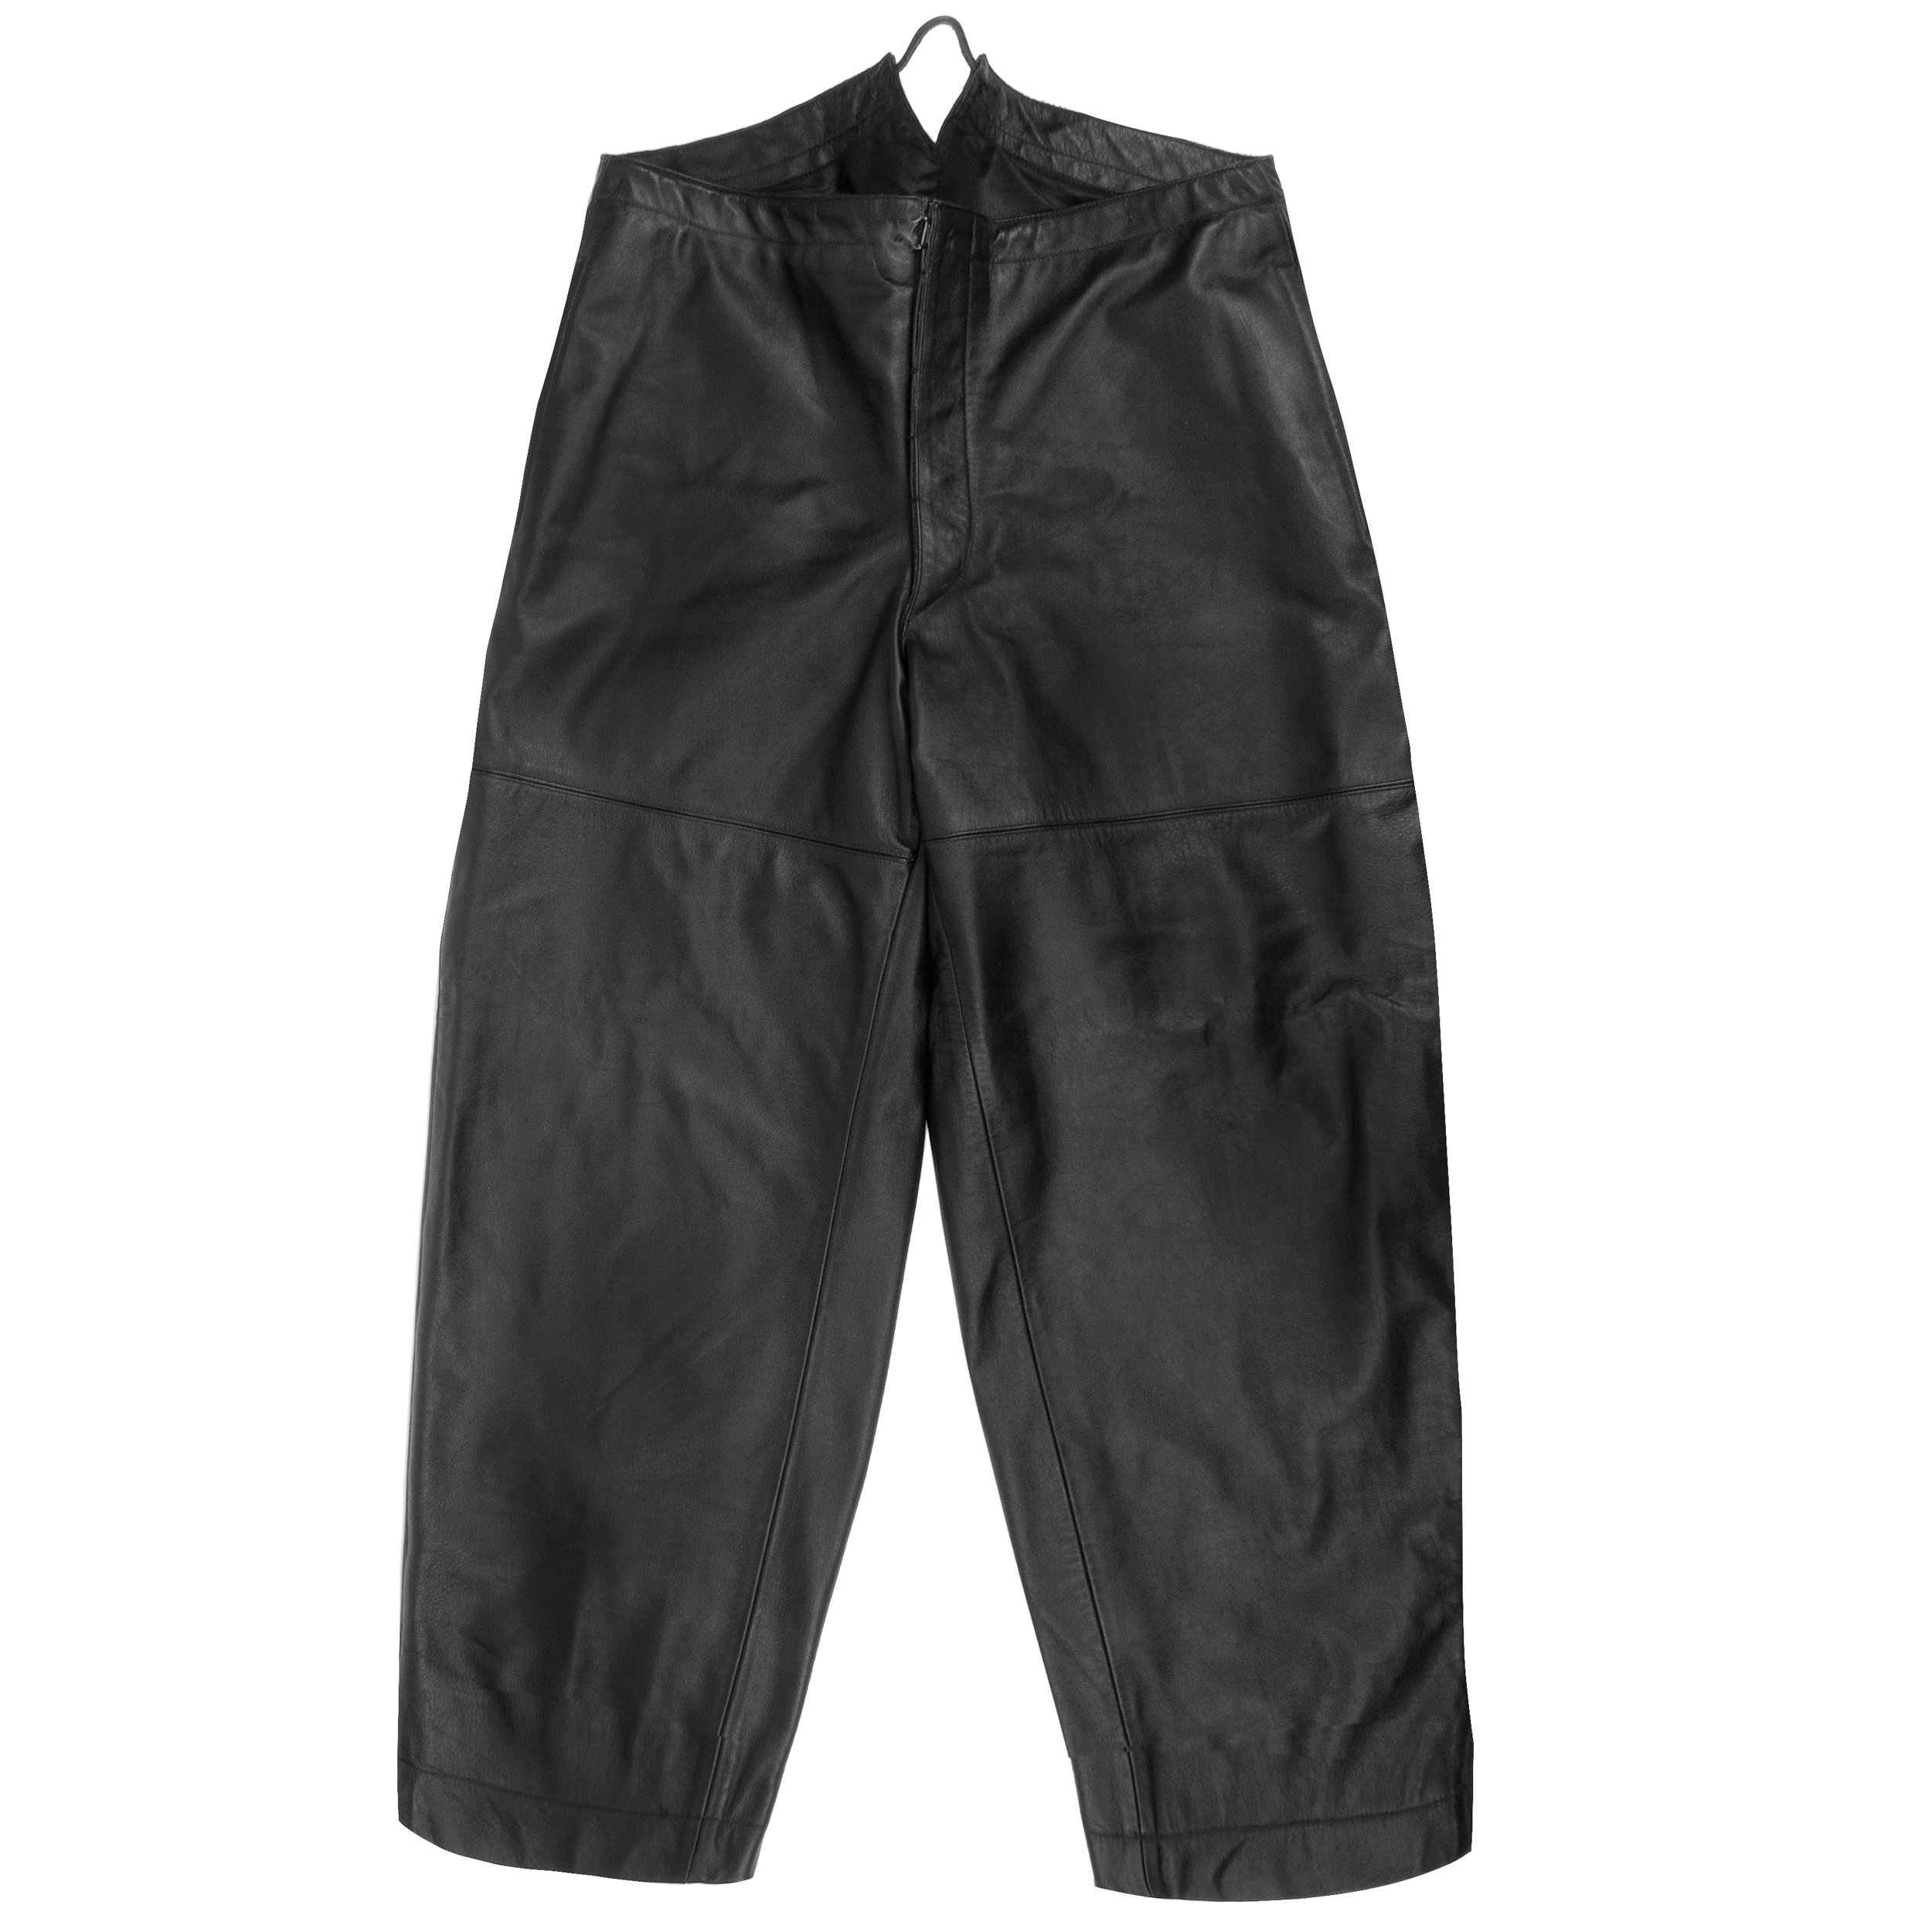 SM Wholesale USA — U-Boat Leather Deck Trousers (Also worn by SS)